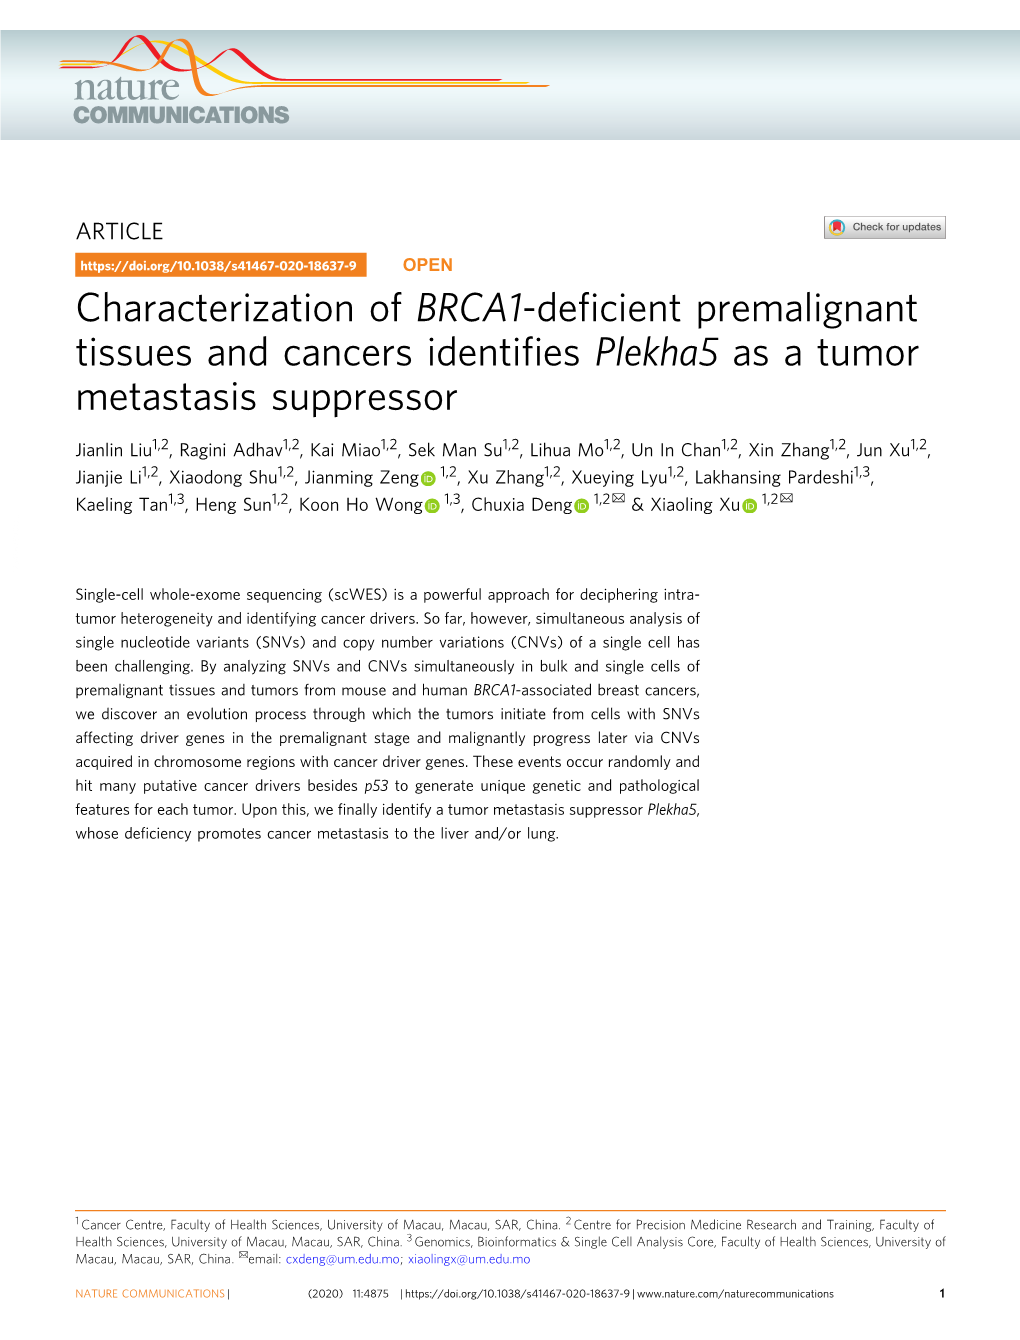 Characterization of BRCA1-Deficient Premalignant Tissues and Cancers Identifies Plekha5 As a Tumor Metastasis Suppressor